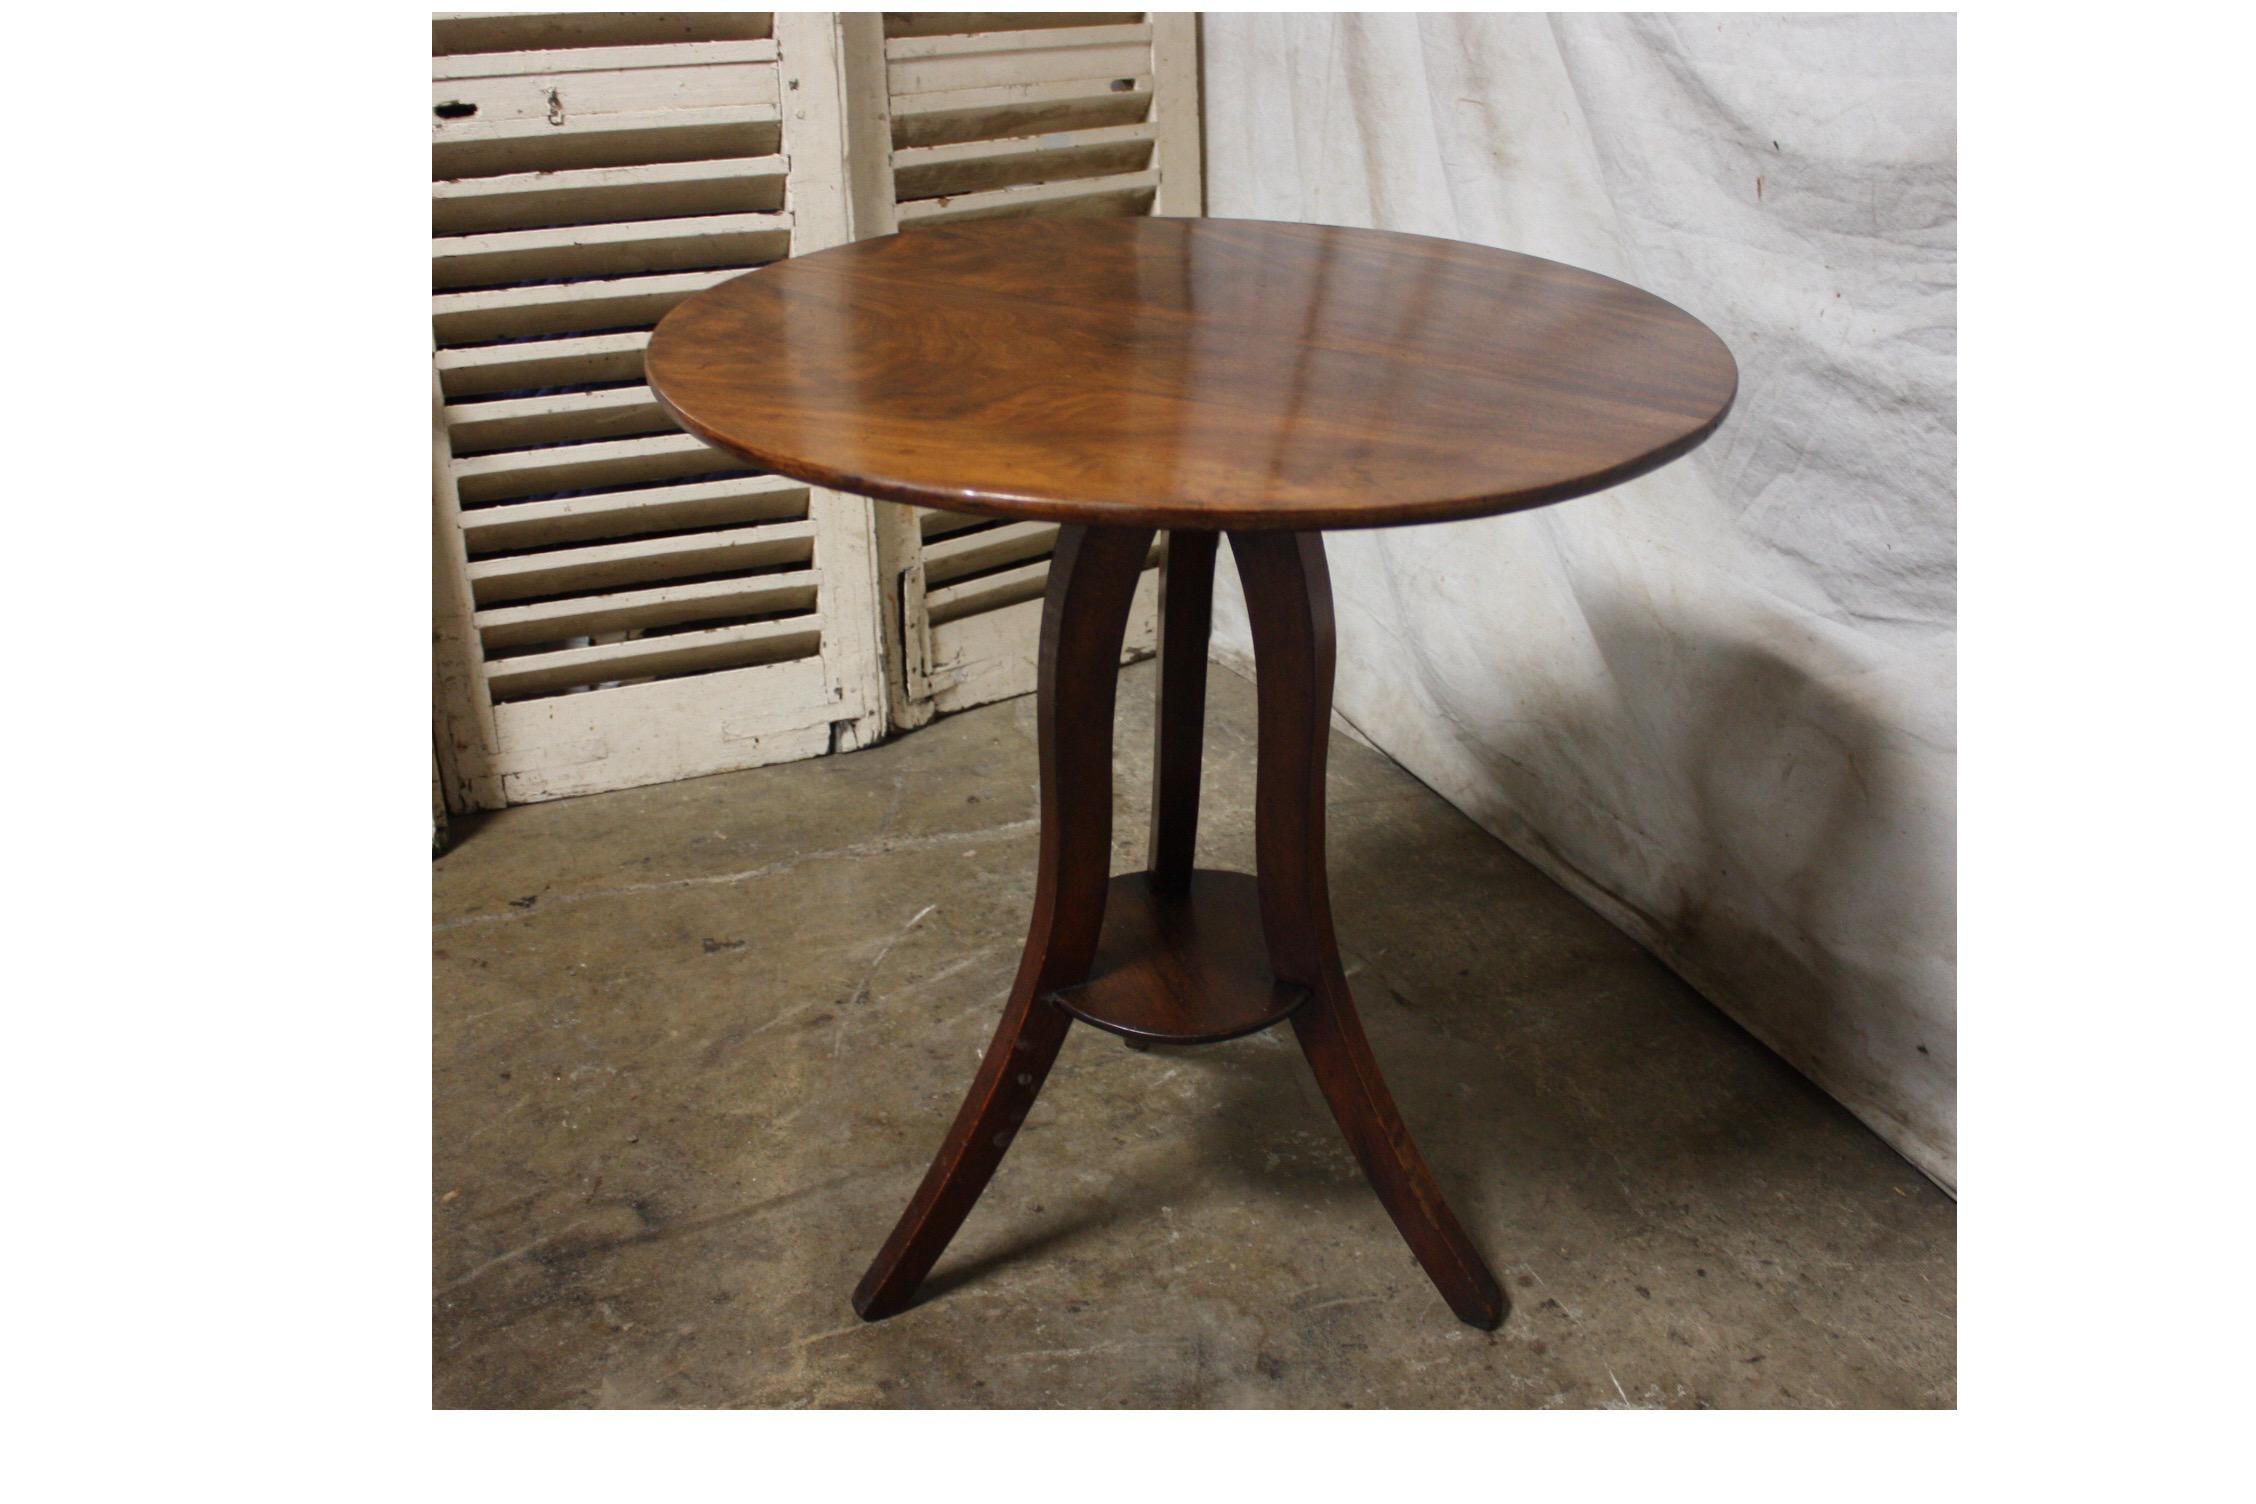 Charming piece, nice movement of the legs. When the table top is stand up the height is 41.75''H.